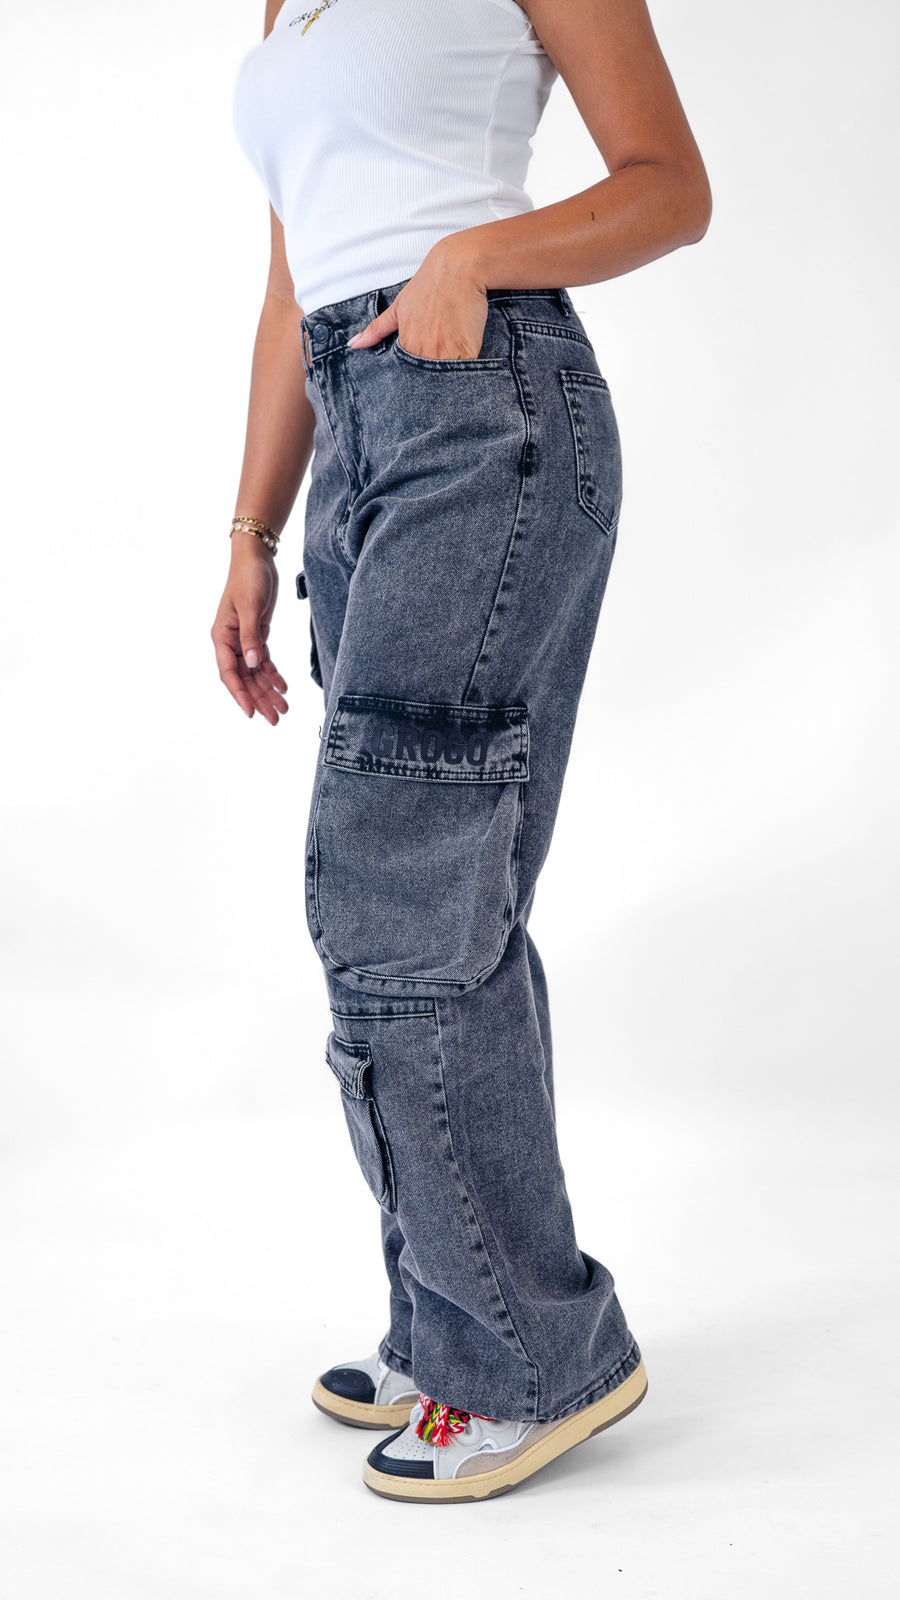 blue cargo jeans pants with pockets